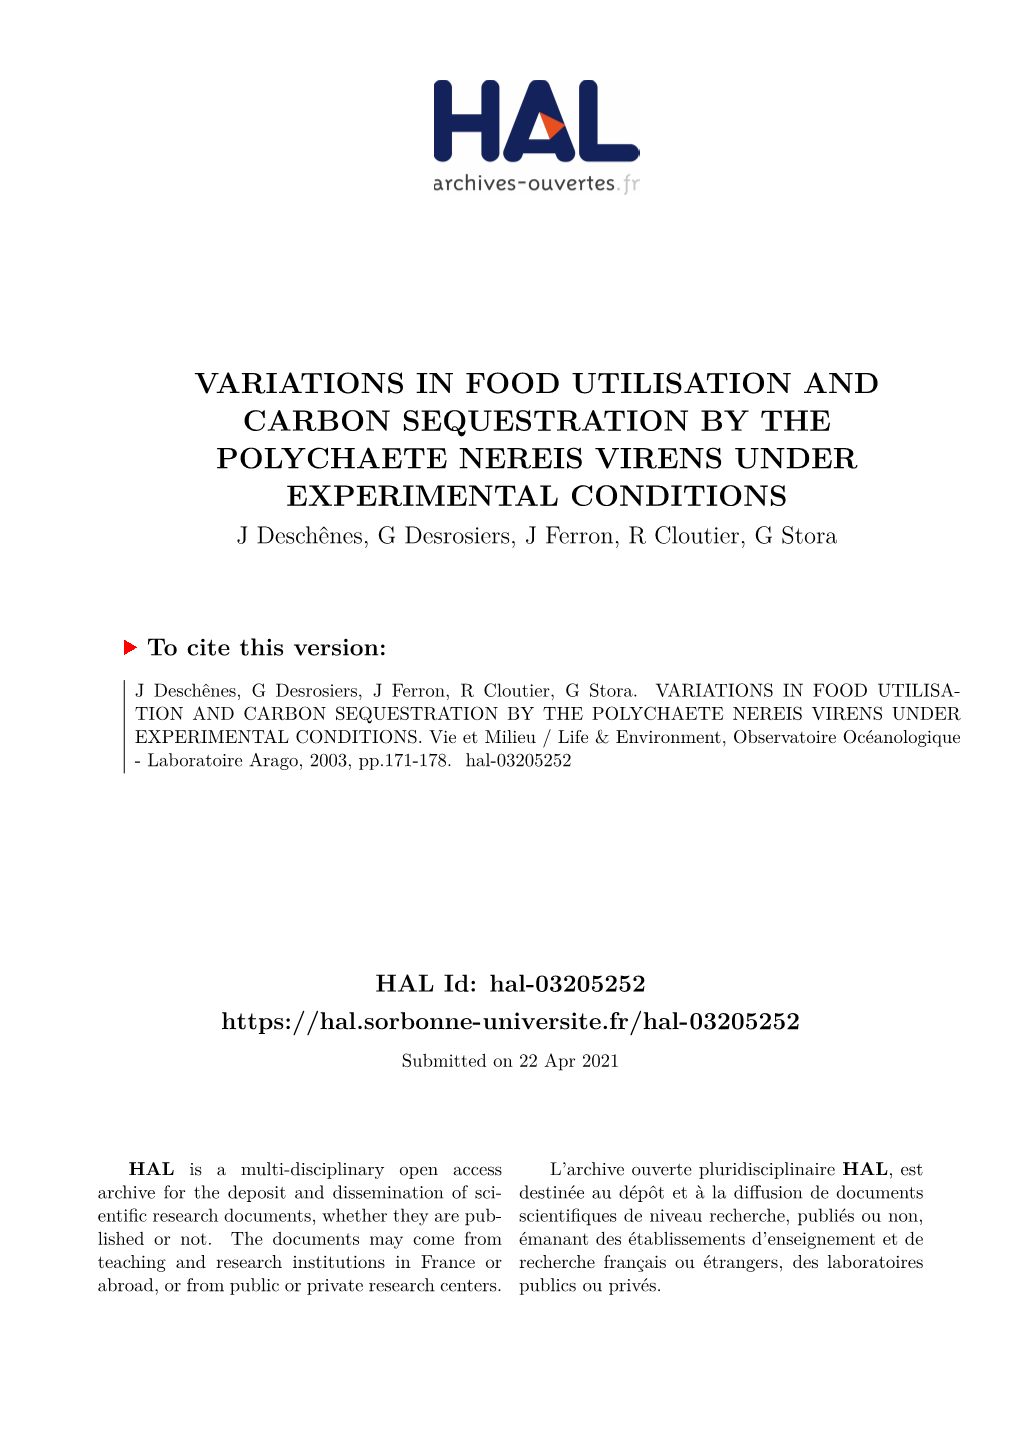 Variations in Food Utilisation and Carbon Sequestration